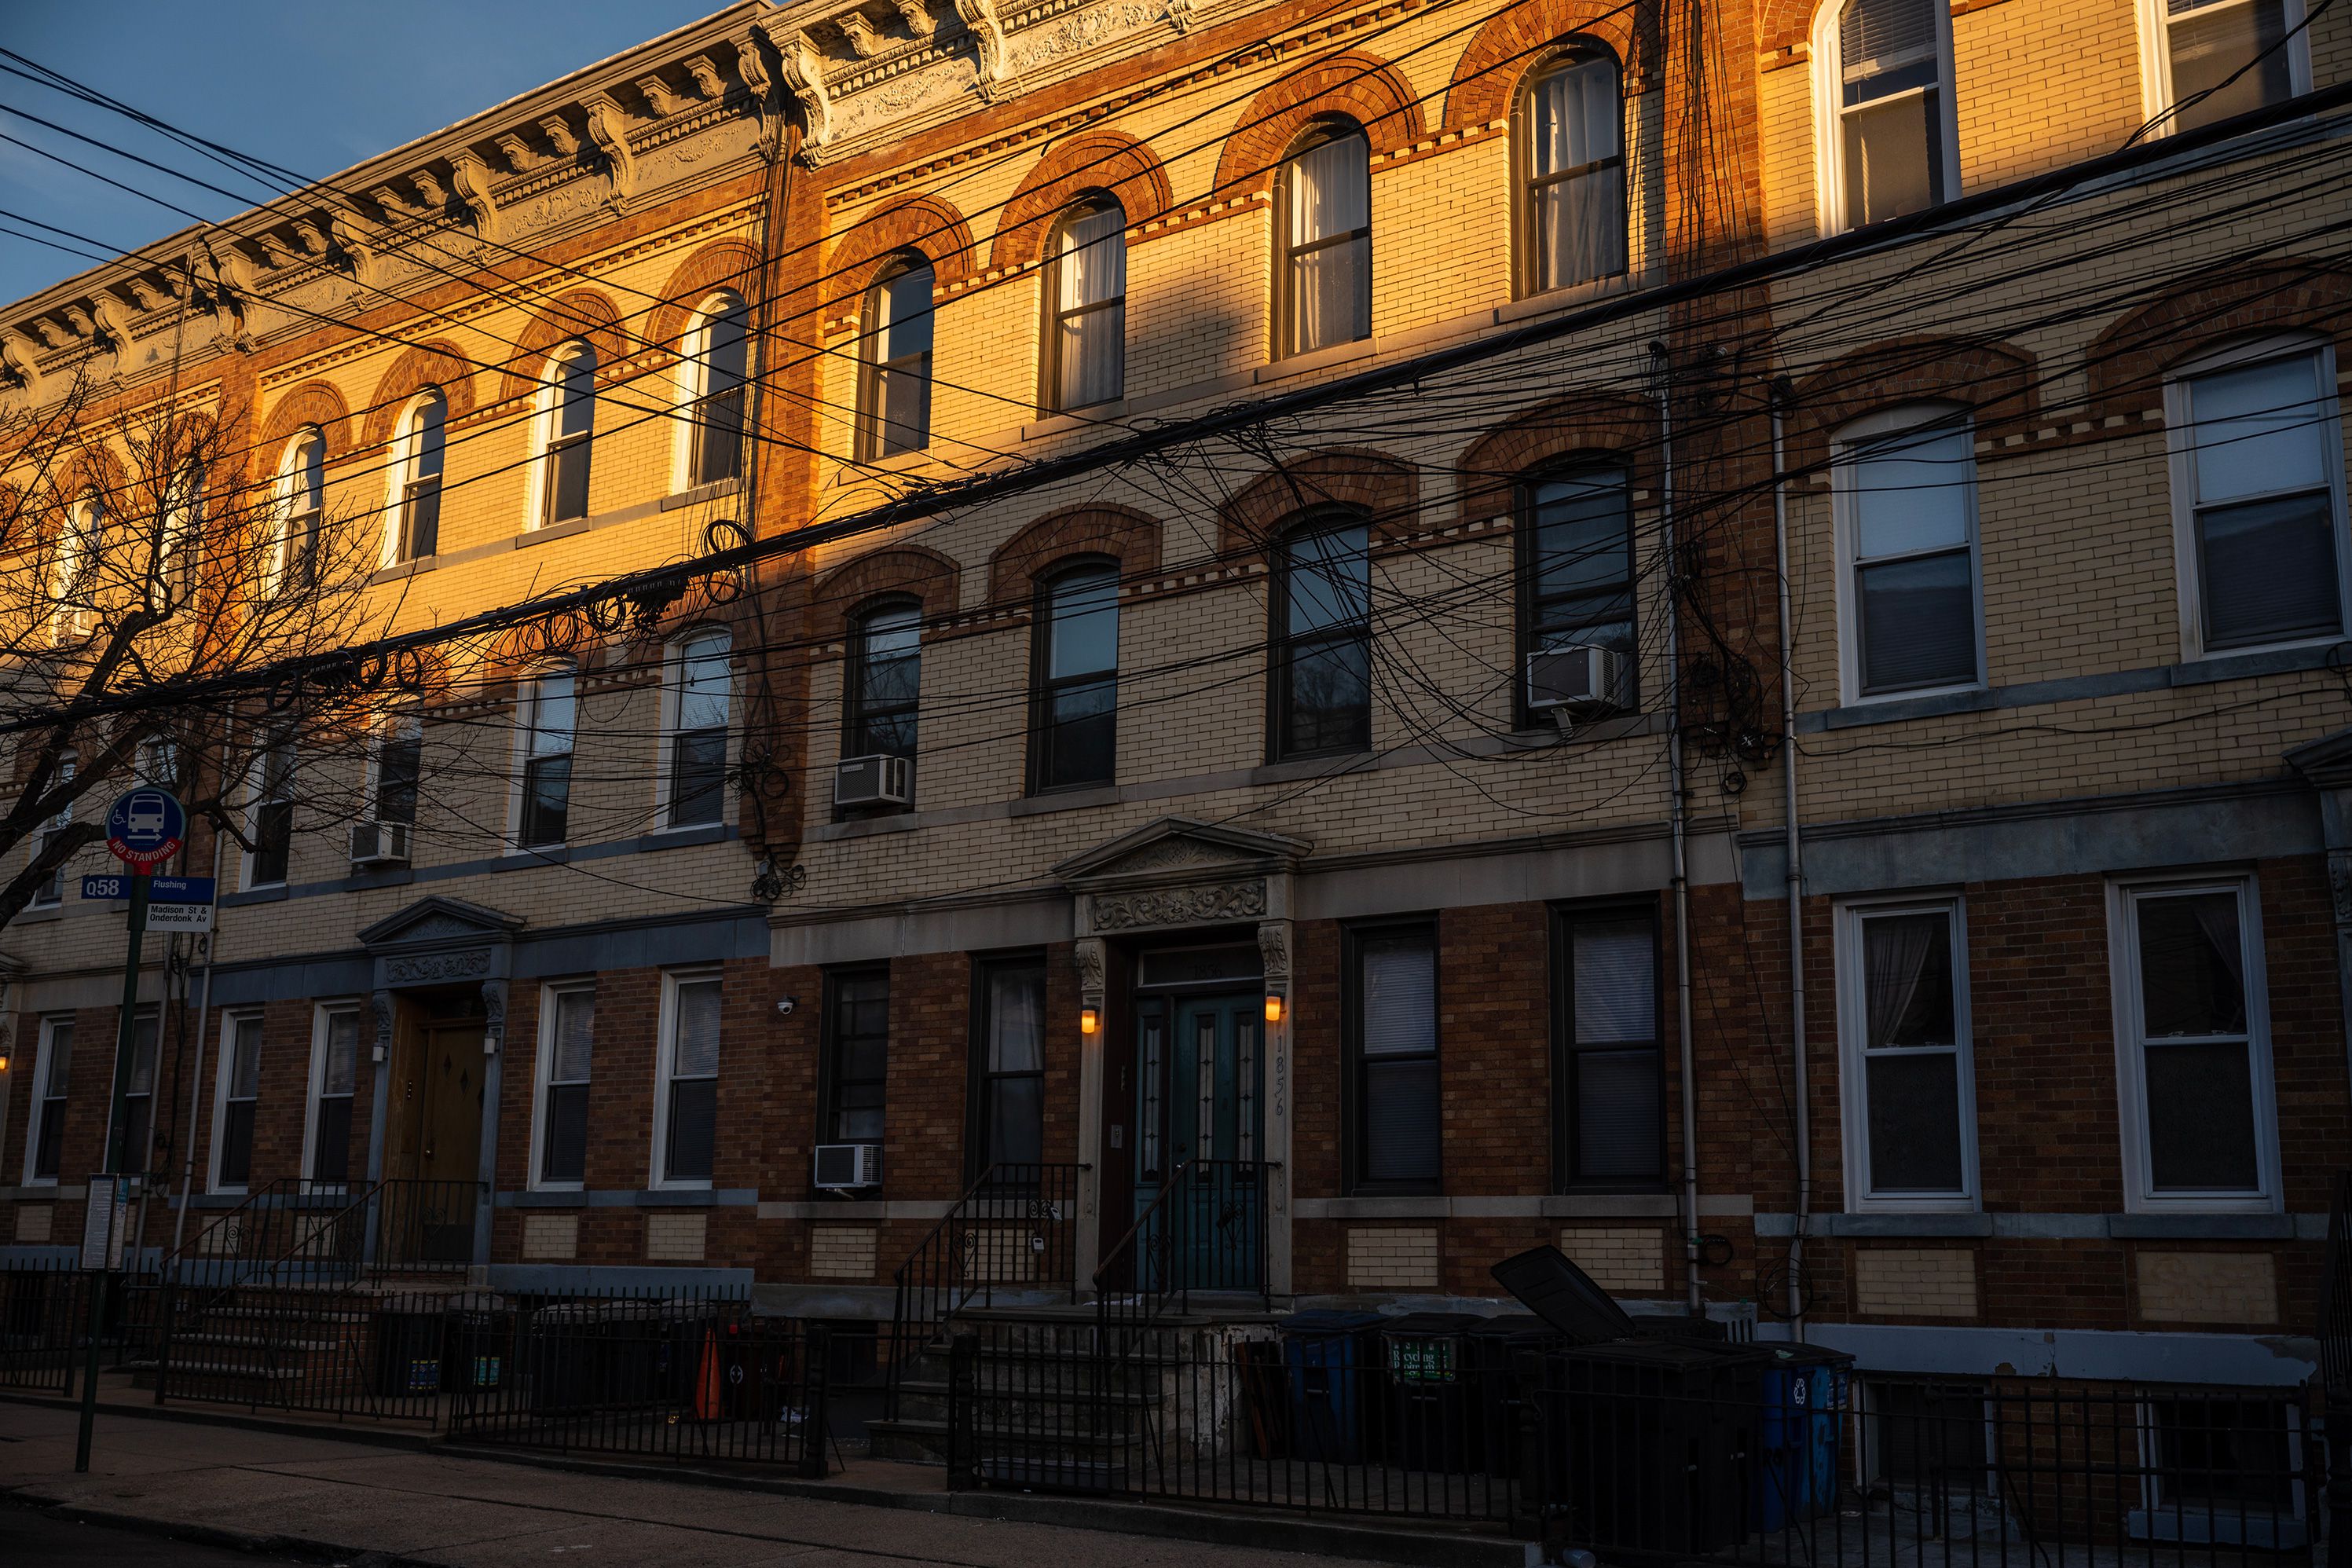 Golden sunset light illuminated the top floor of a row of tenement buildings on a Ridgewood residential block.